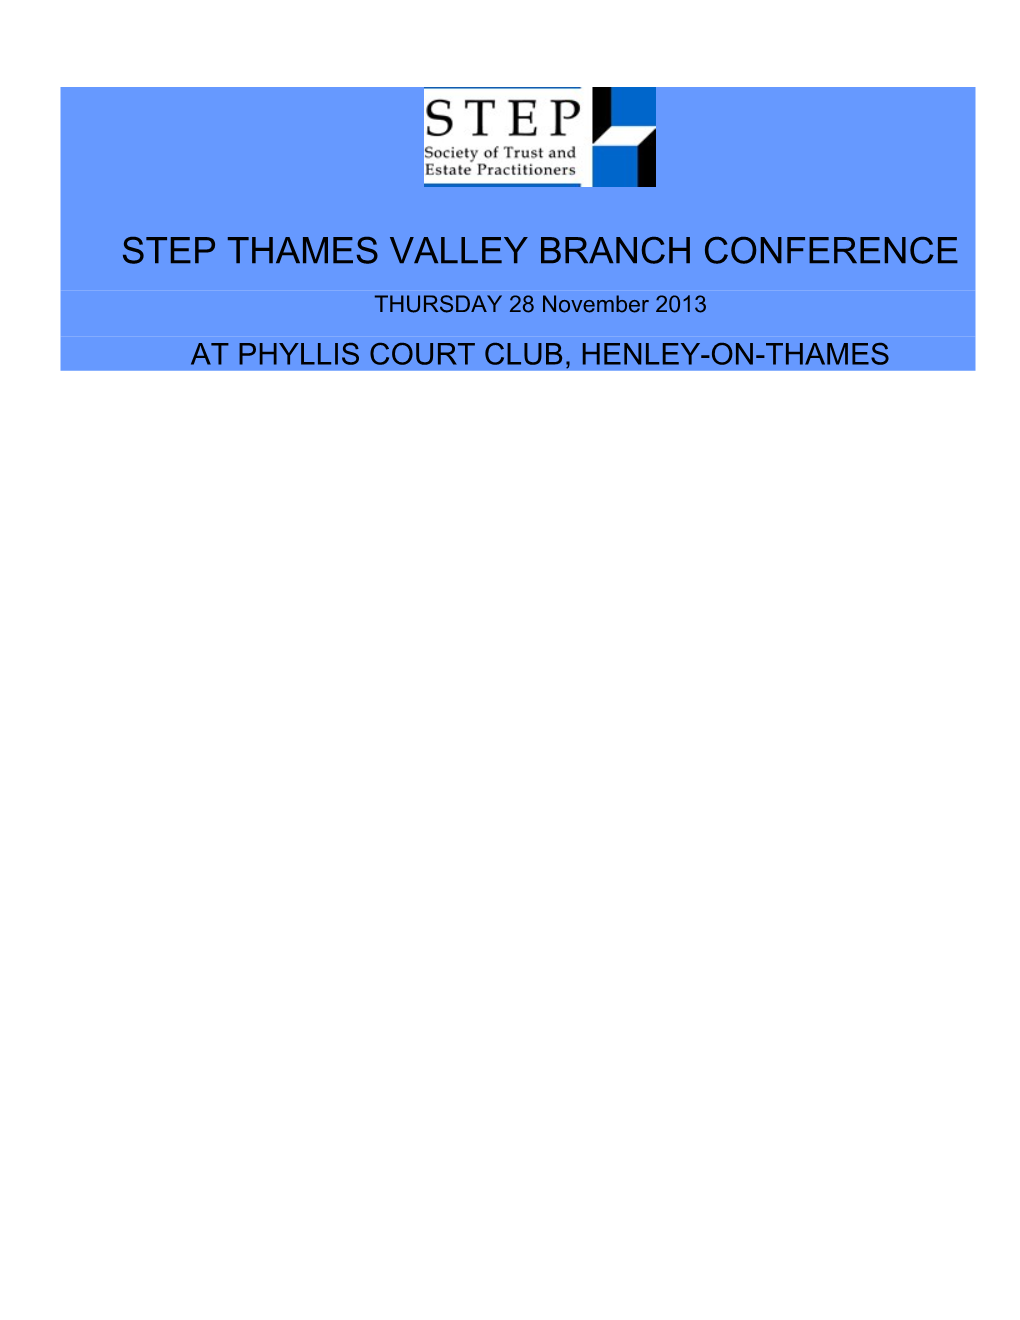 Step Thames Valley Branch Conference